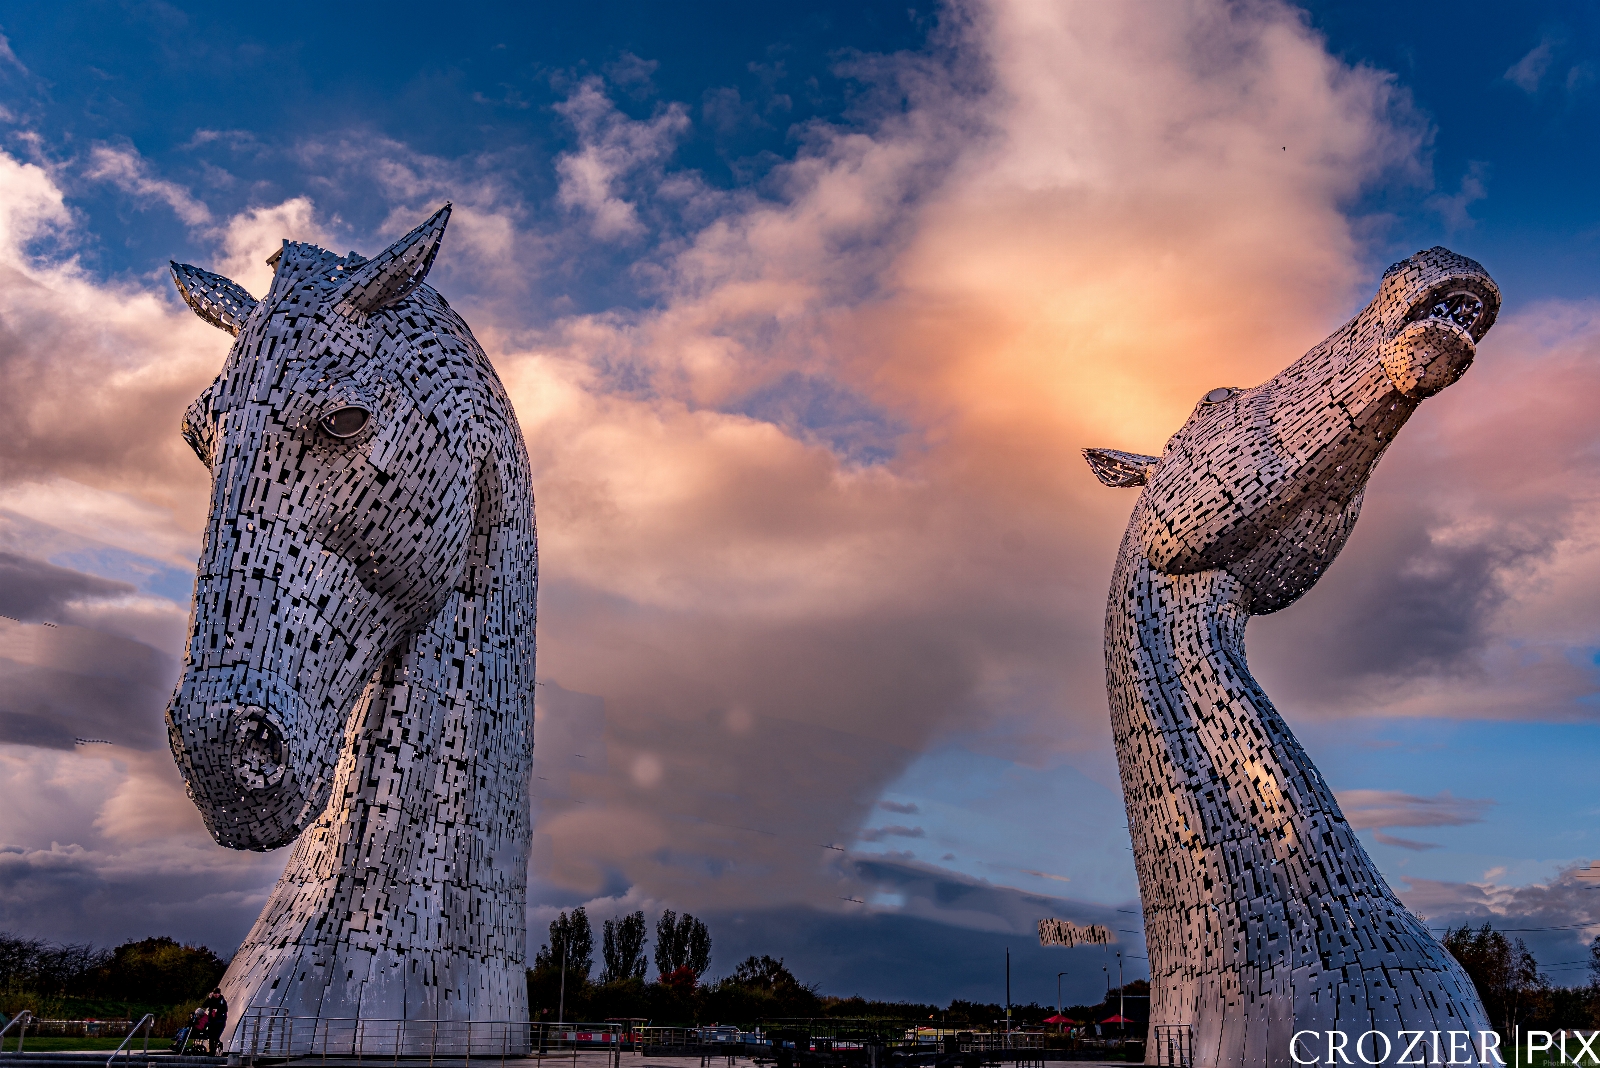 Image of The Kelpies, Helix Park by Alan Crozier